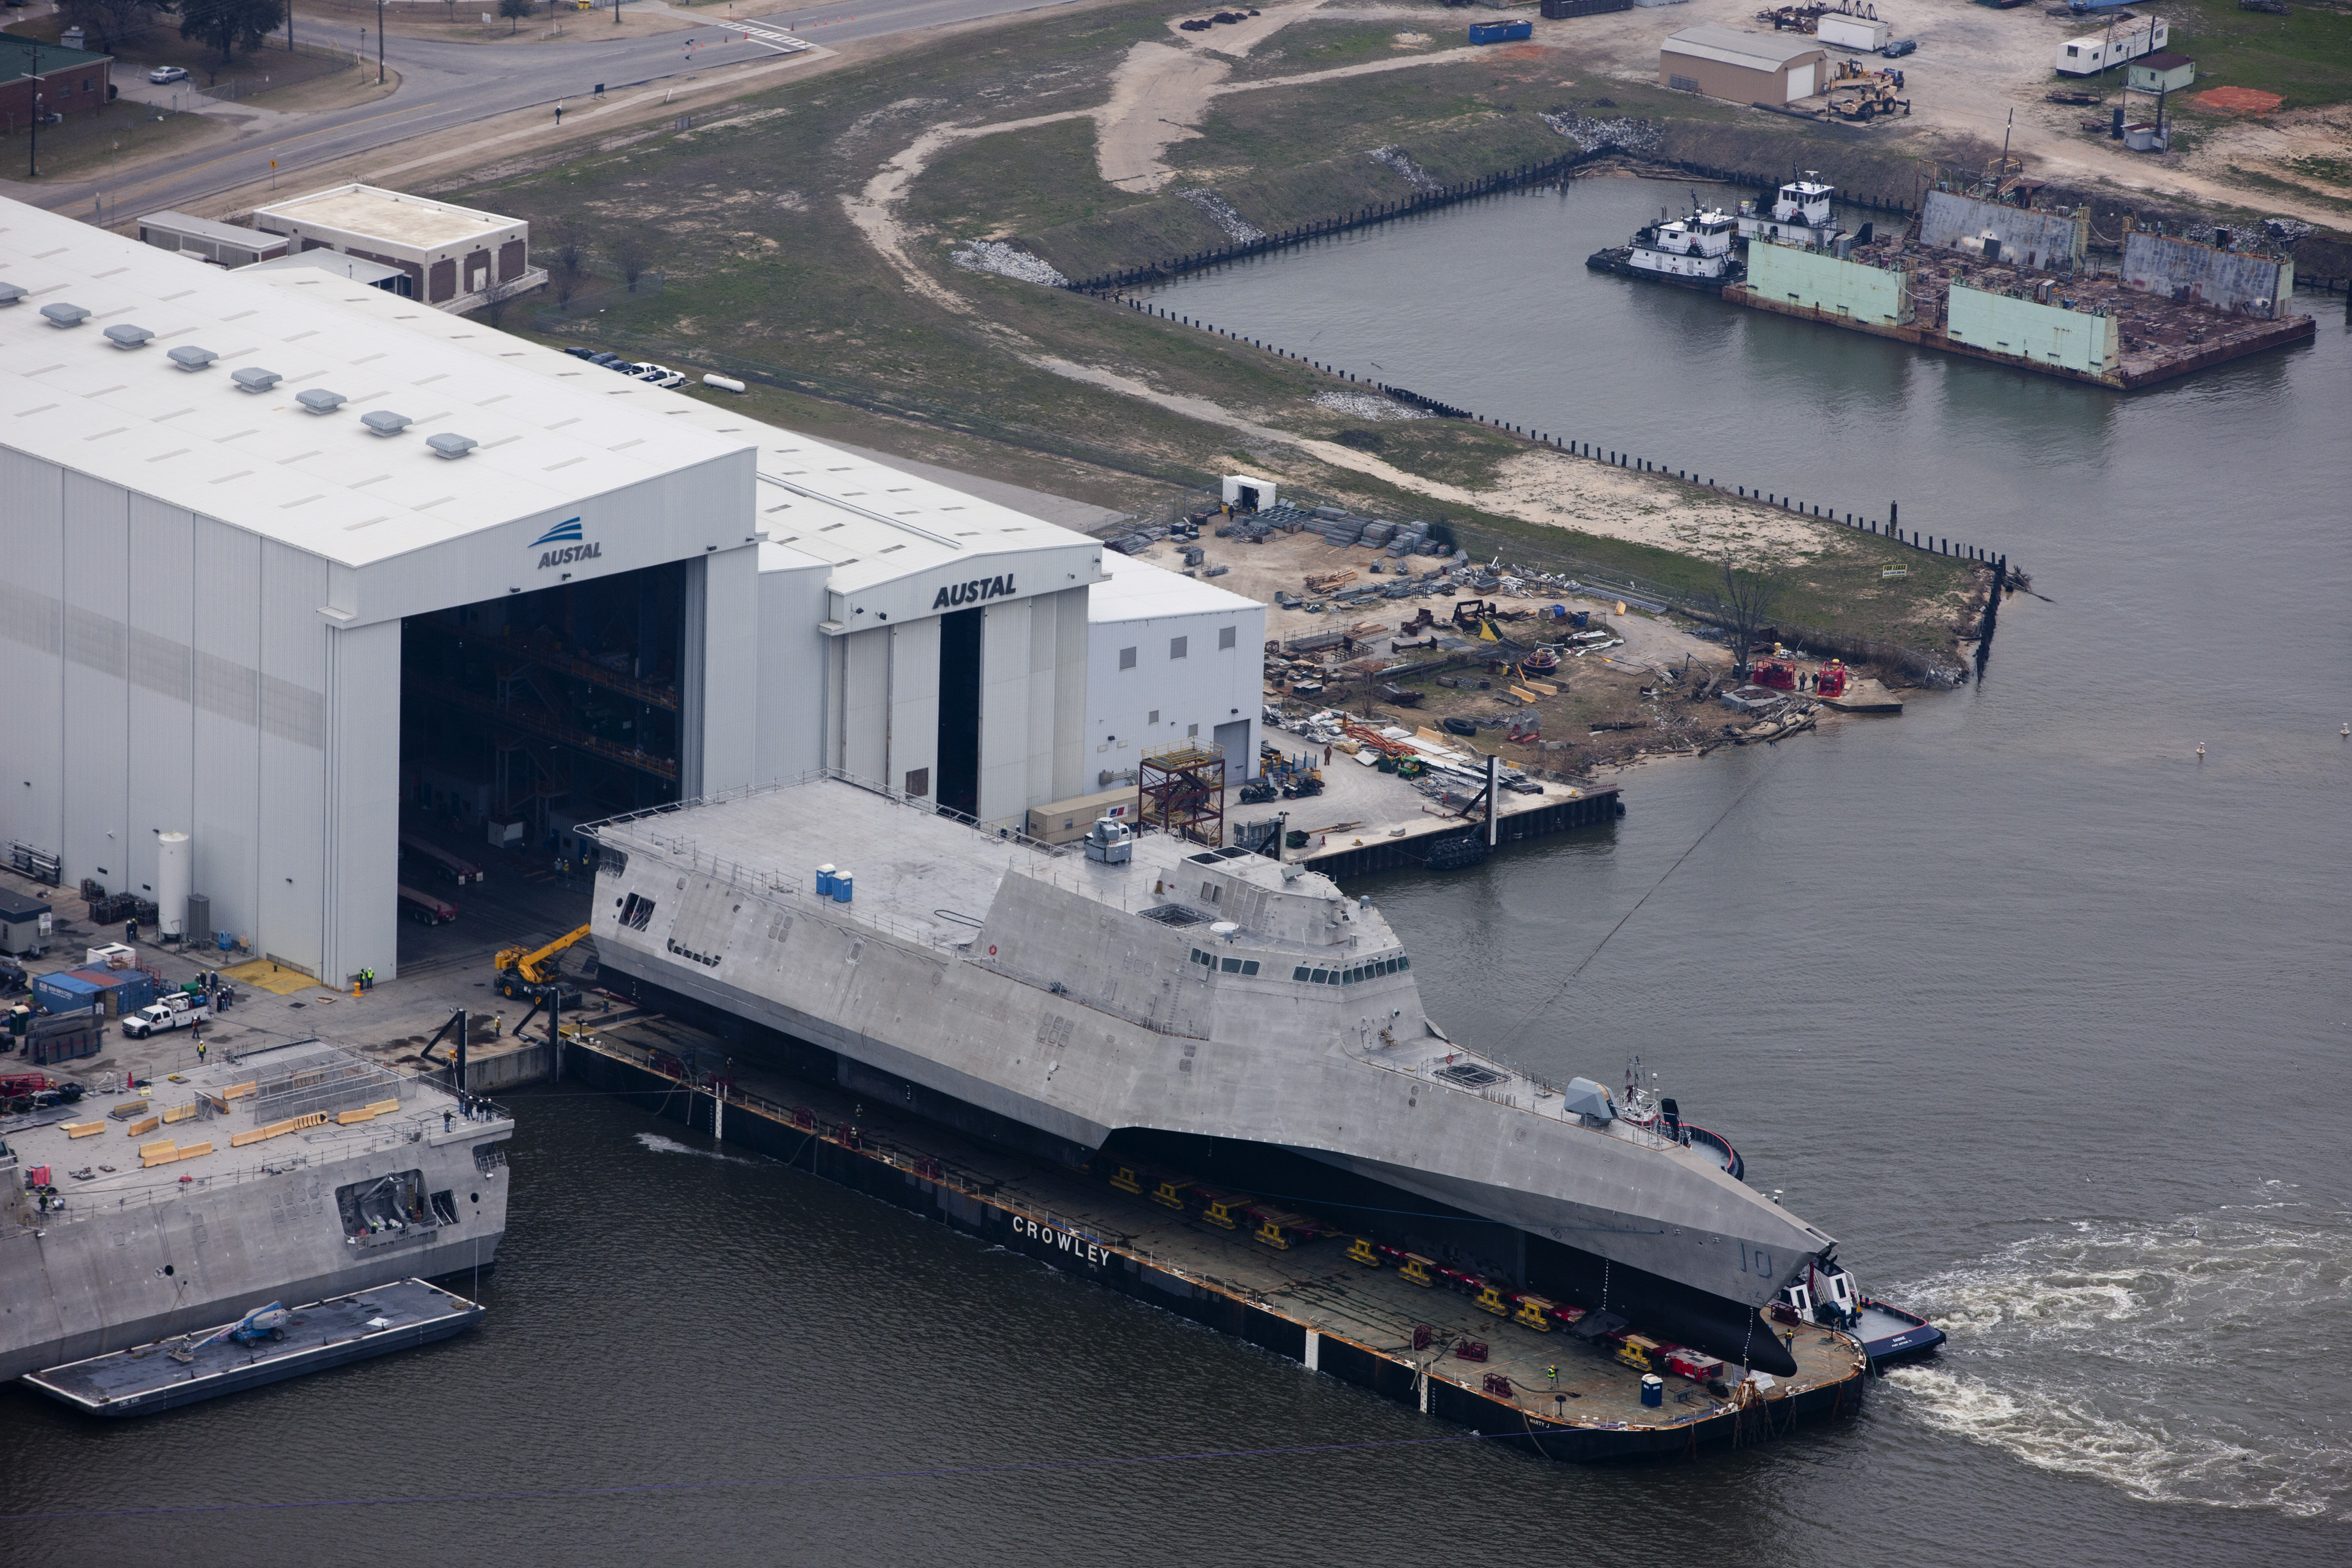 150224-N-EW716-002 MOBILE, Ala. (Feb. 24, 2015) An aerial view of the future littoral combat ship USS Gabrielle Giffords (LCS 10) during its launch sequence at the Austal USA shipyard. The launch of the Gabrielle Giffords marks an important production milestone for the littoral combat ship program. (U.S. Navy photo/Released)